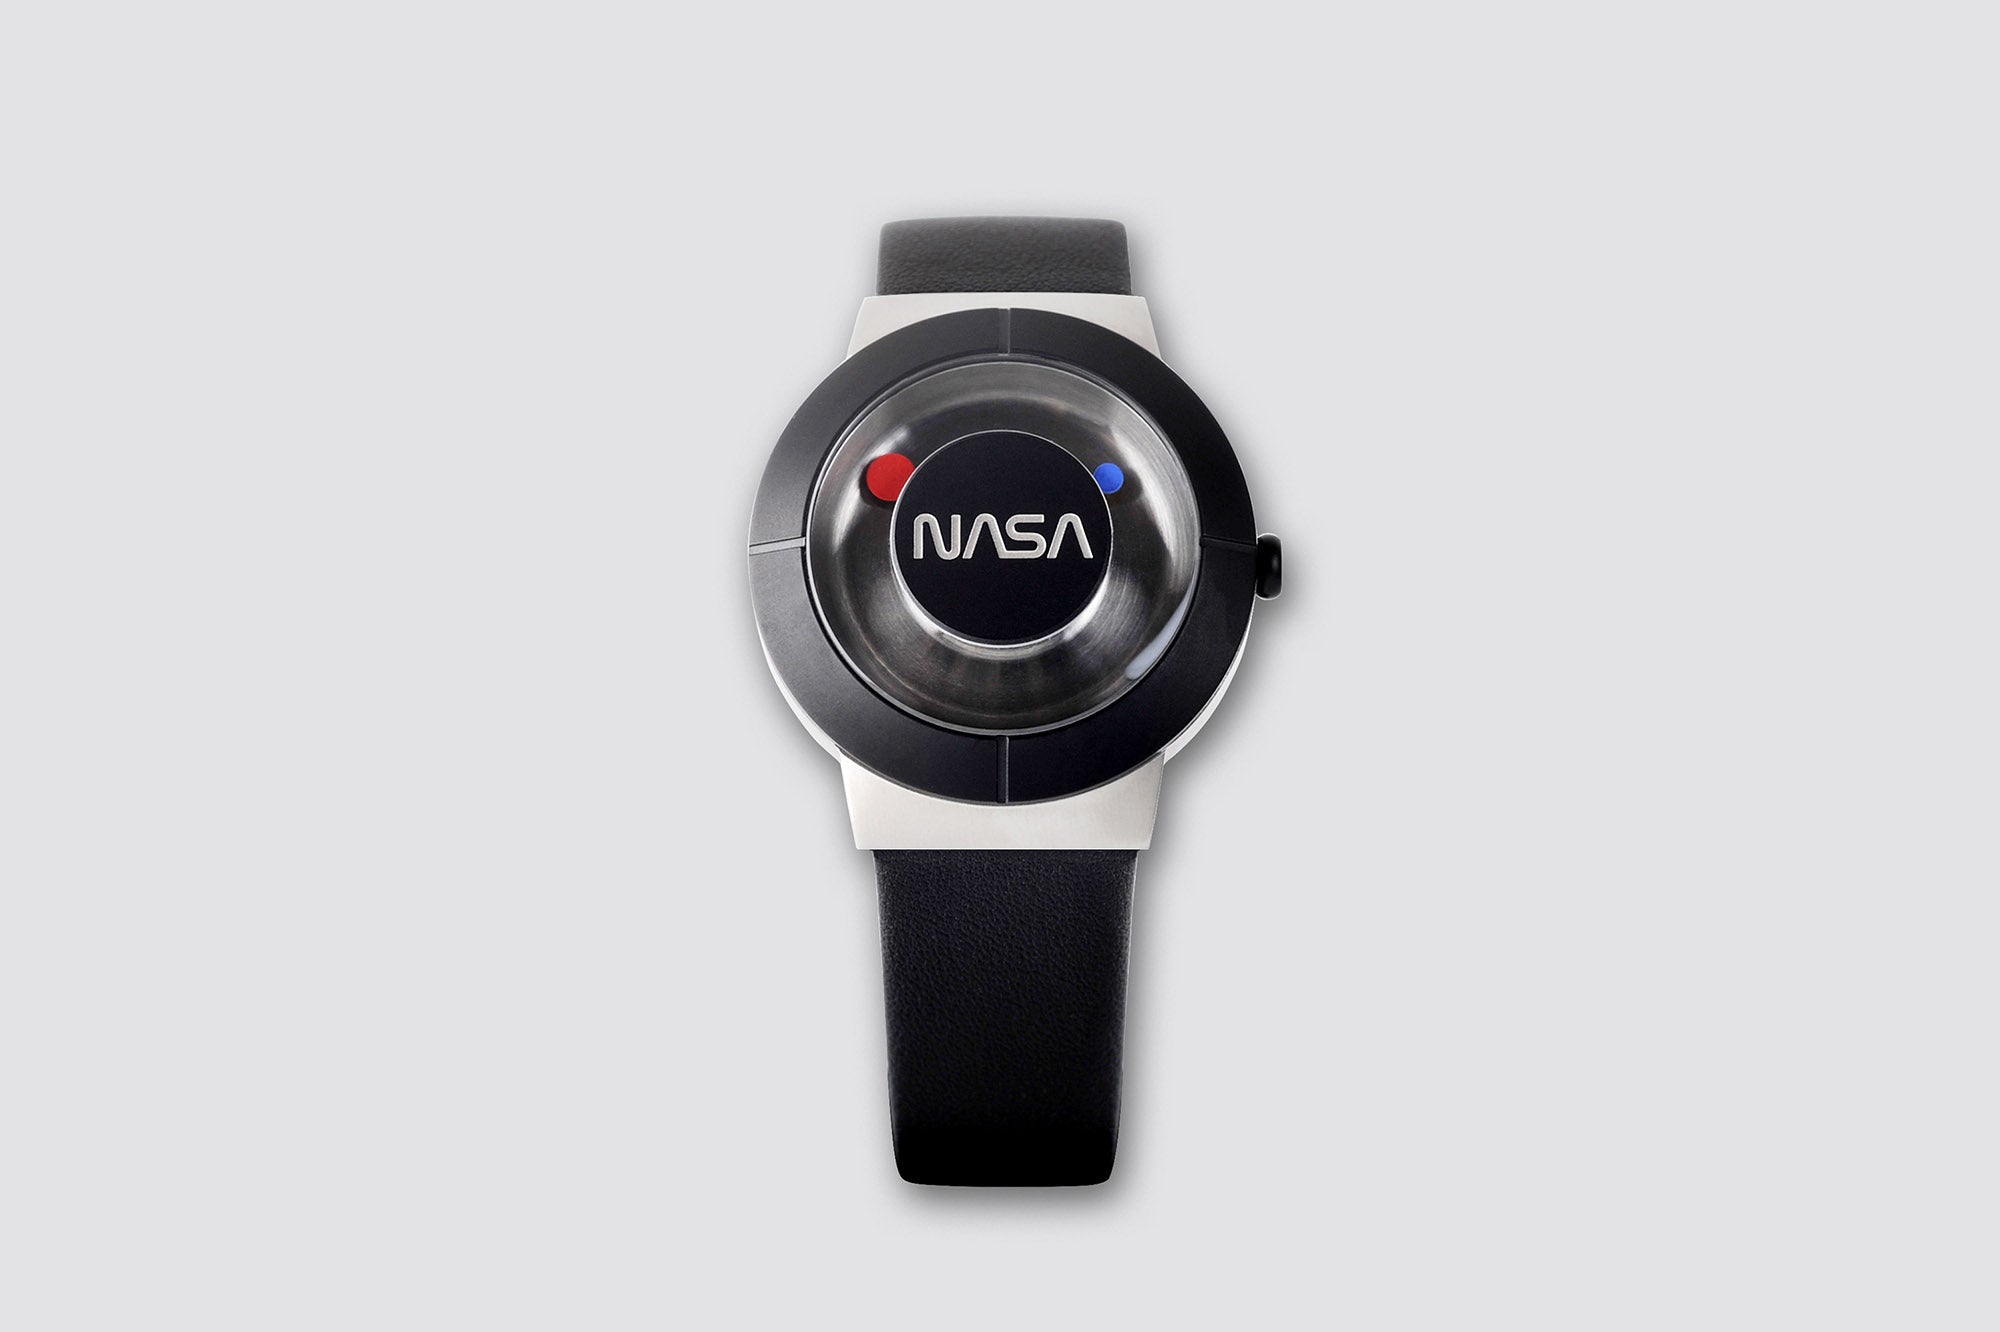 A space watch, inspired by Space itself, “Father of the NASA Design Program” Richard Danne designs his One and Only Space Watch, as homage to his long and fruitful relationship with the NASA family.